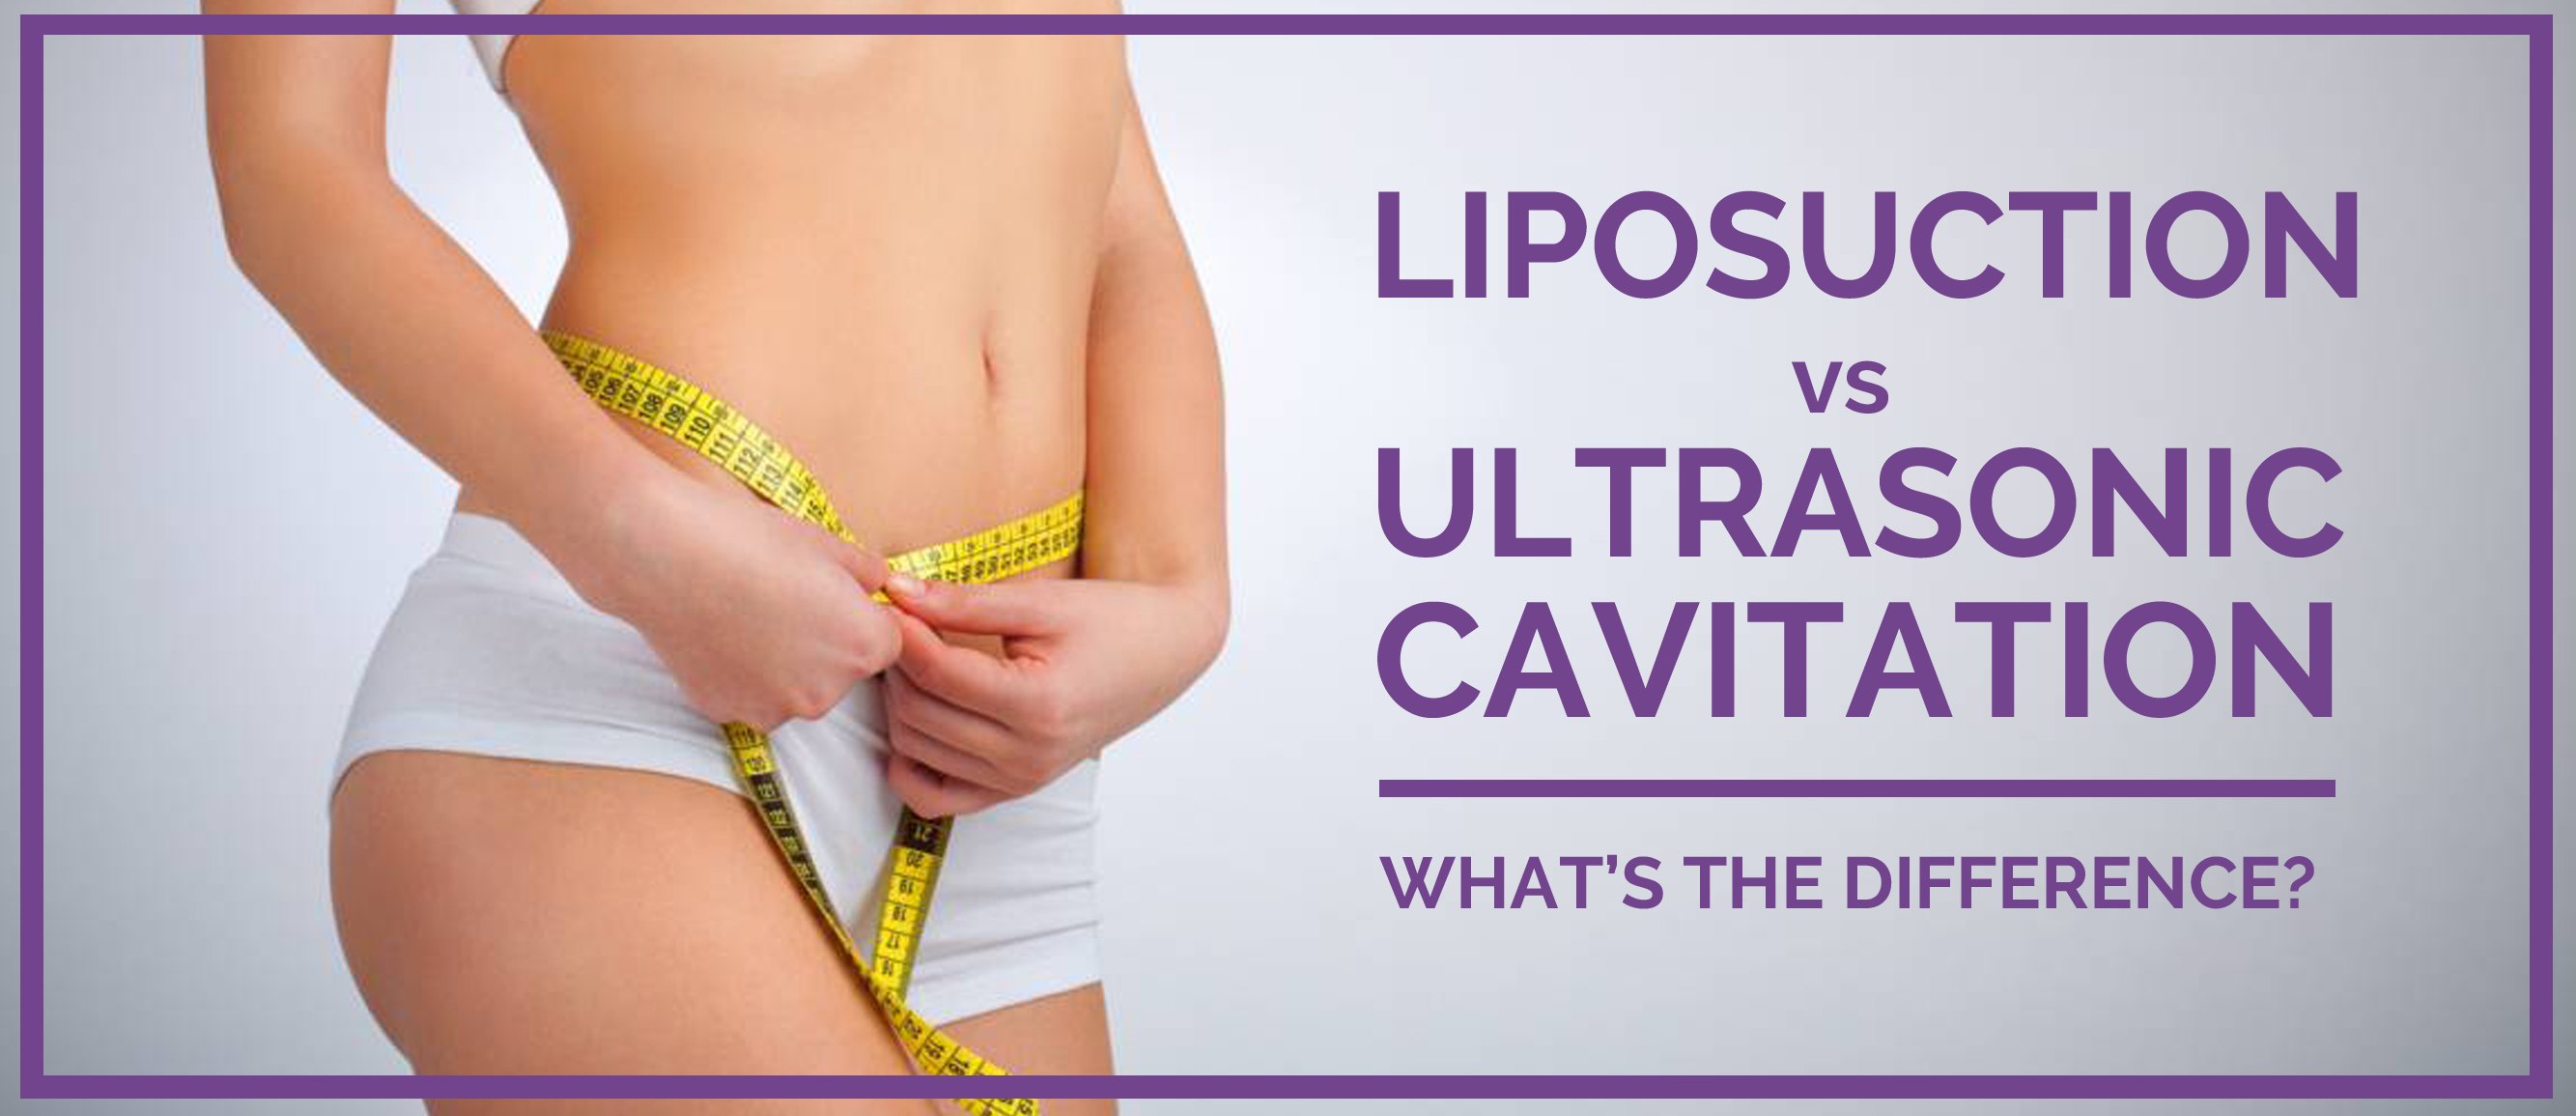 Exercise vs Liposuction - Understanding The Differences